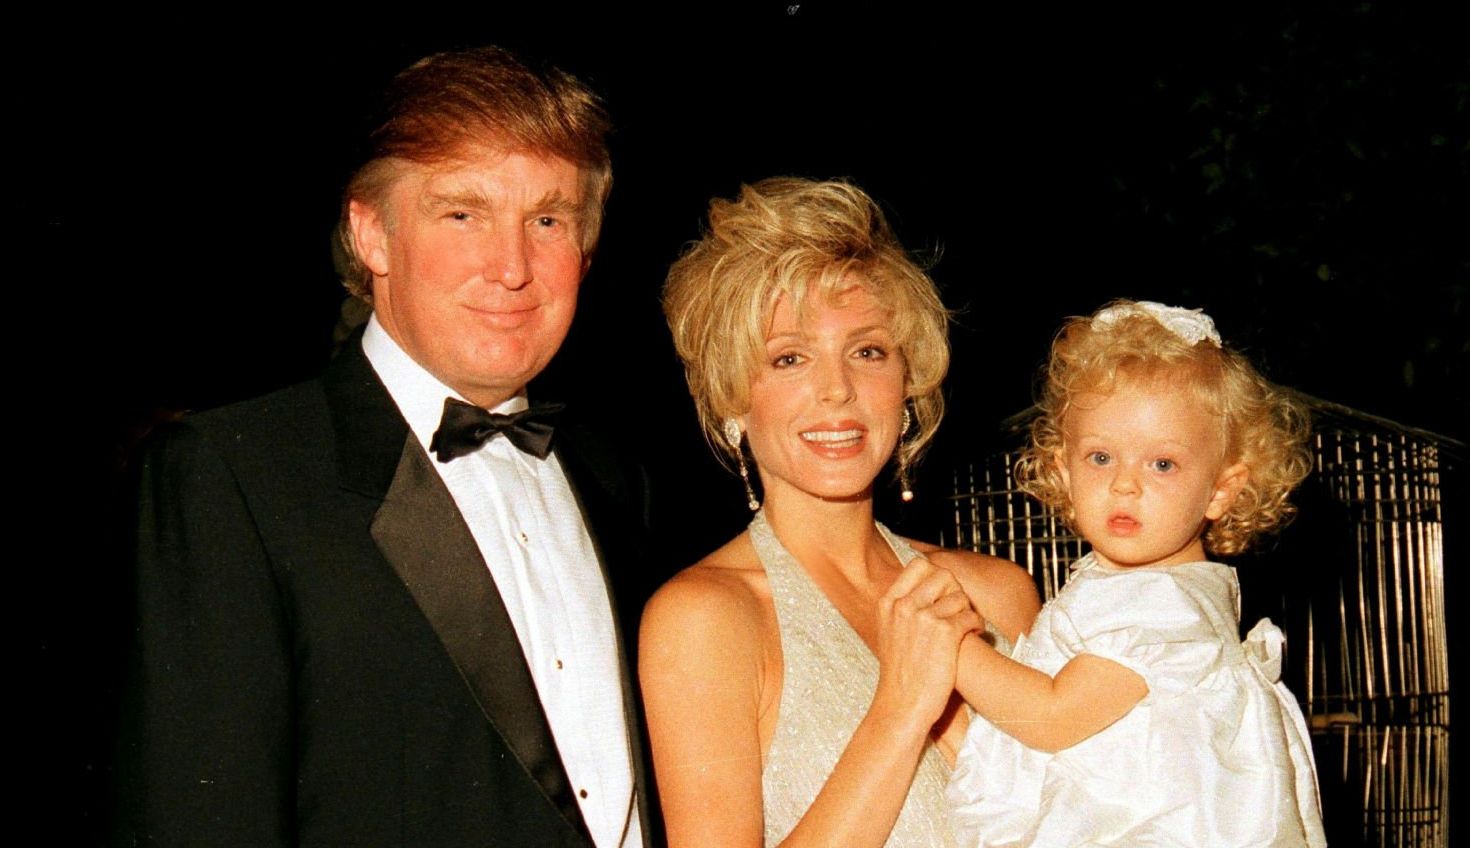 Donald Trump and actress Marla Maples, and their daughter, Tiffany